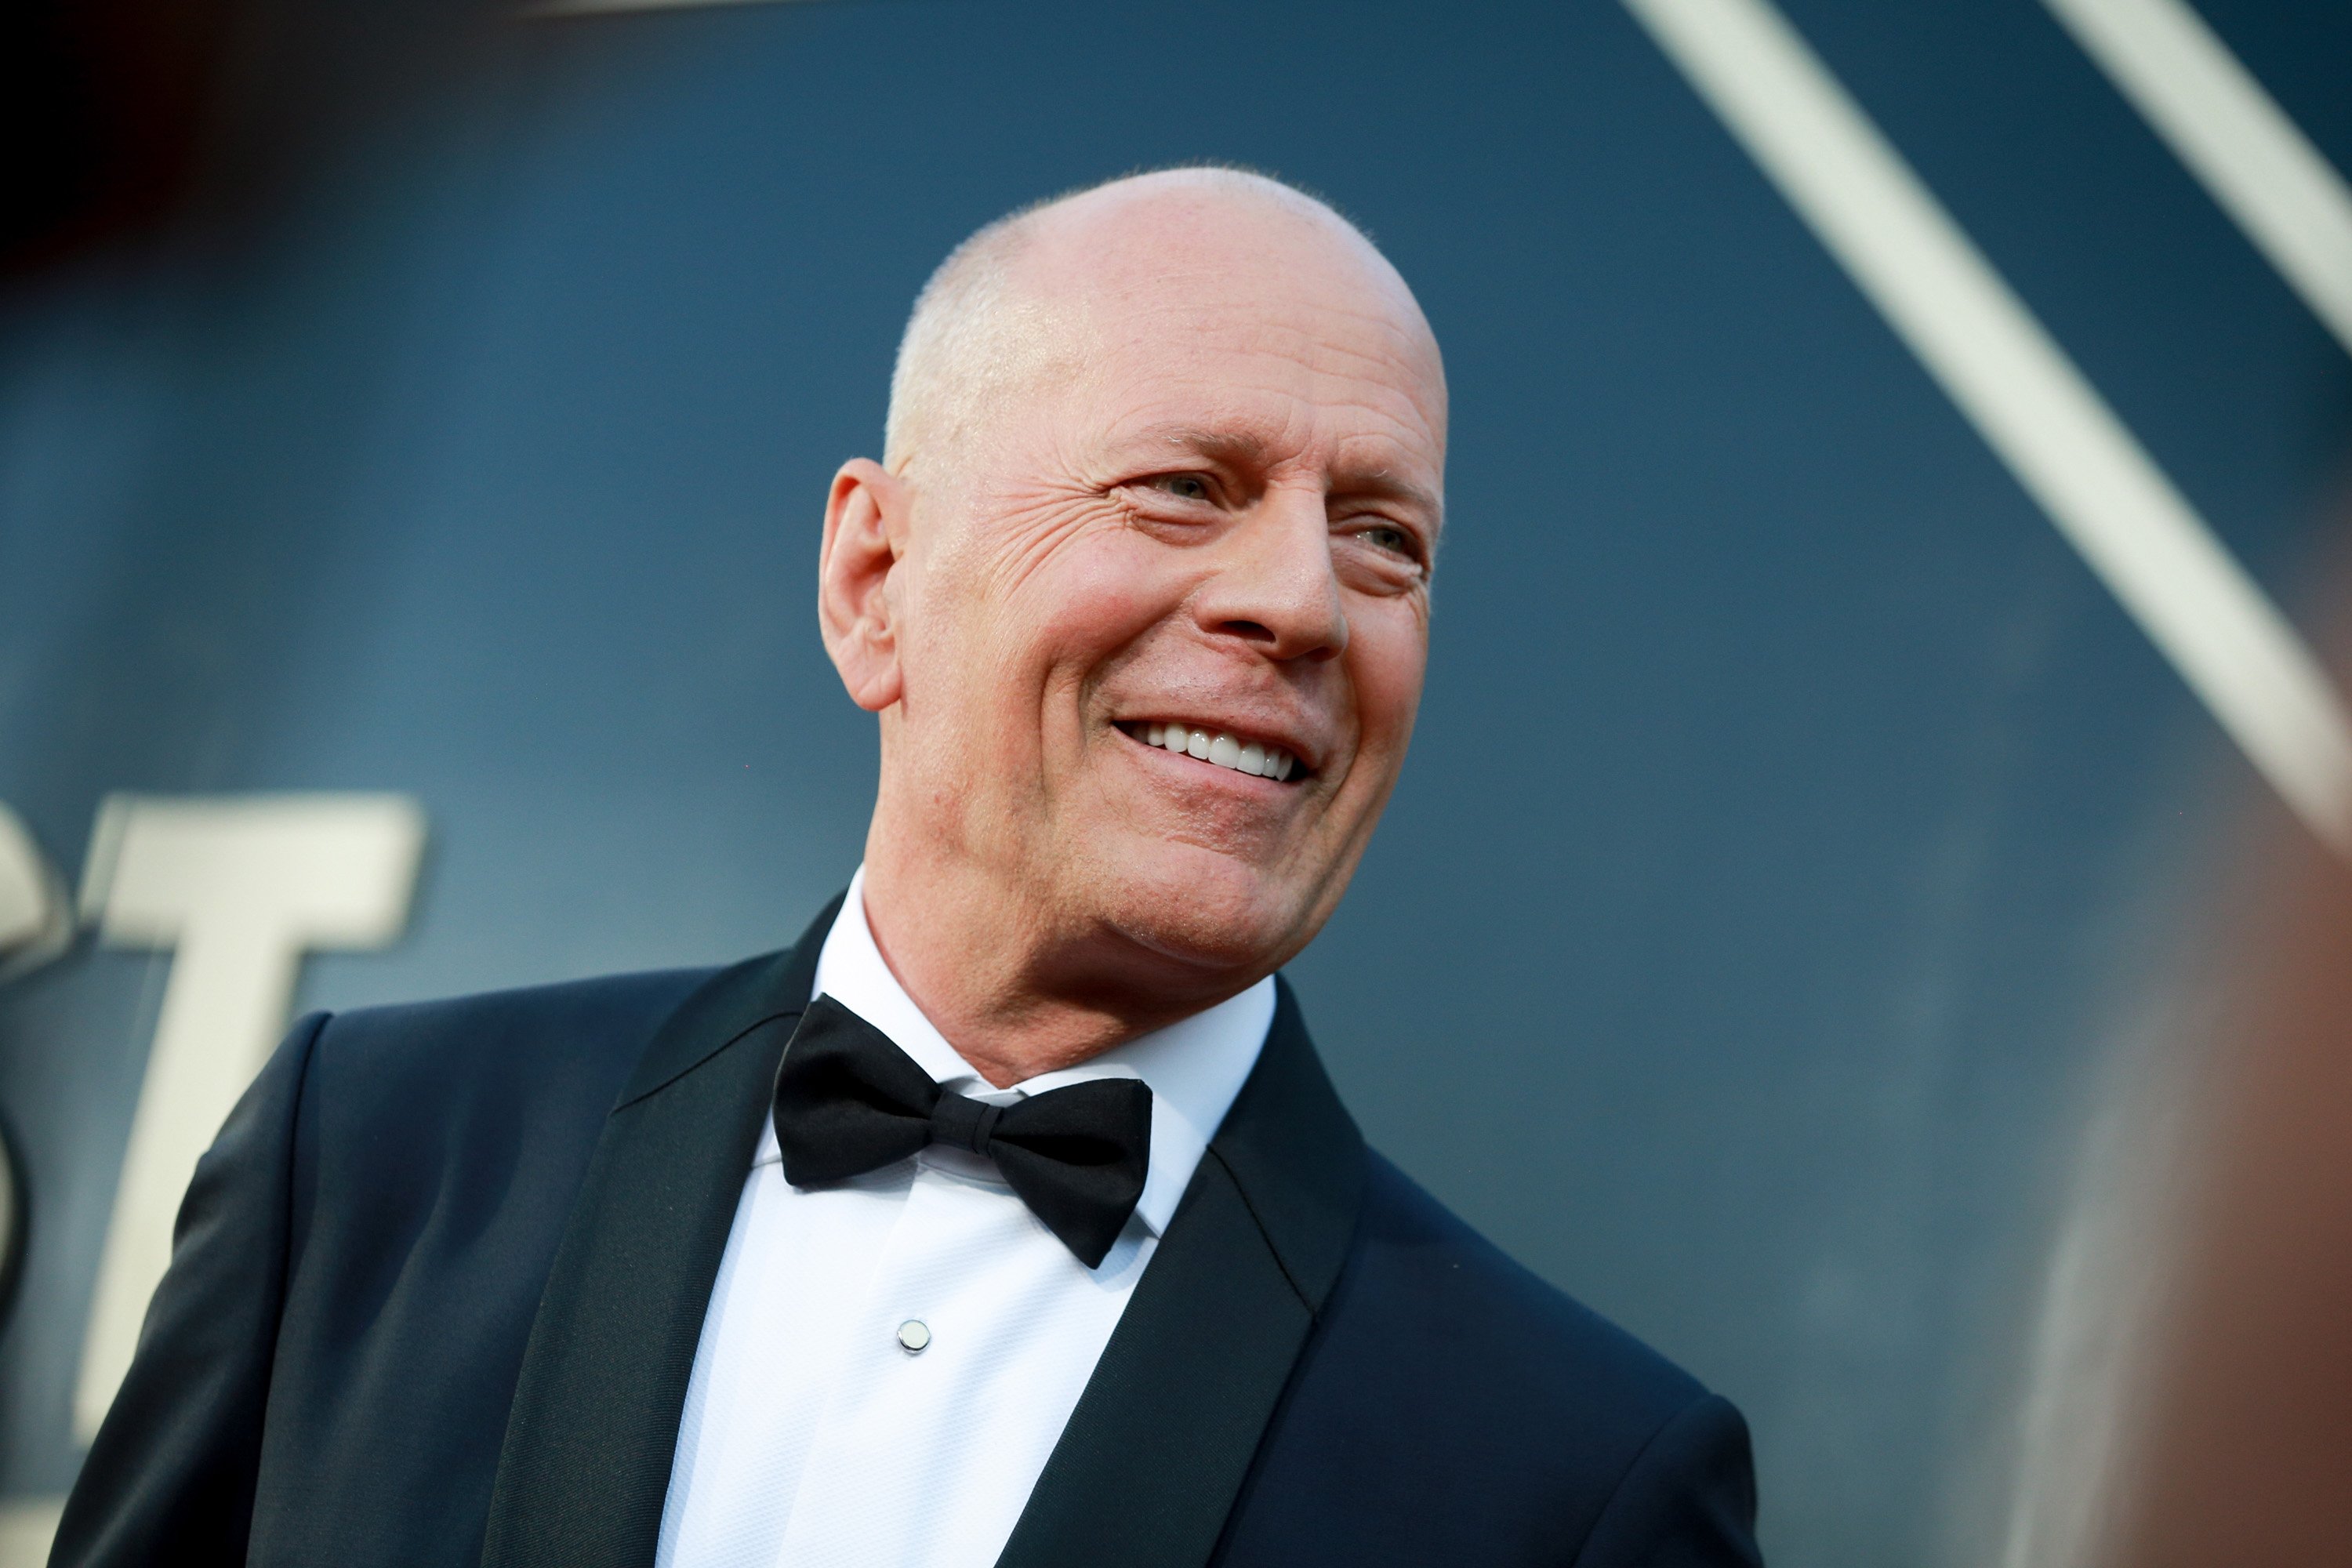 Bruce Willis in a black suit and bowtie.